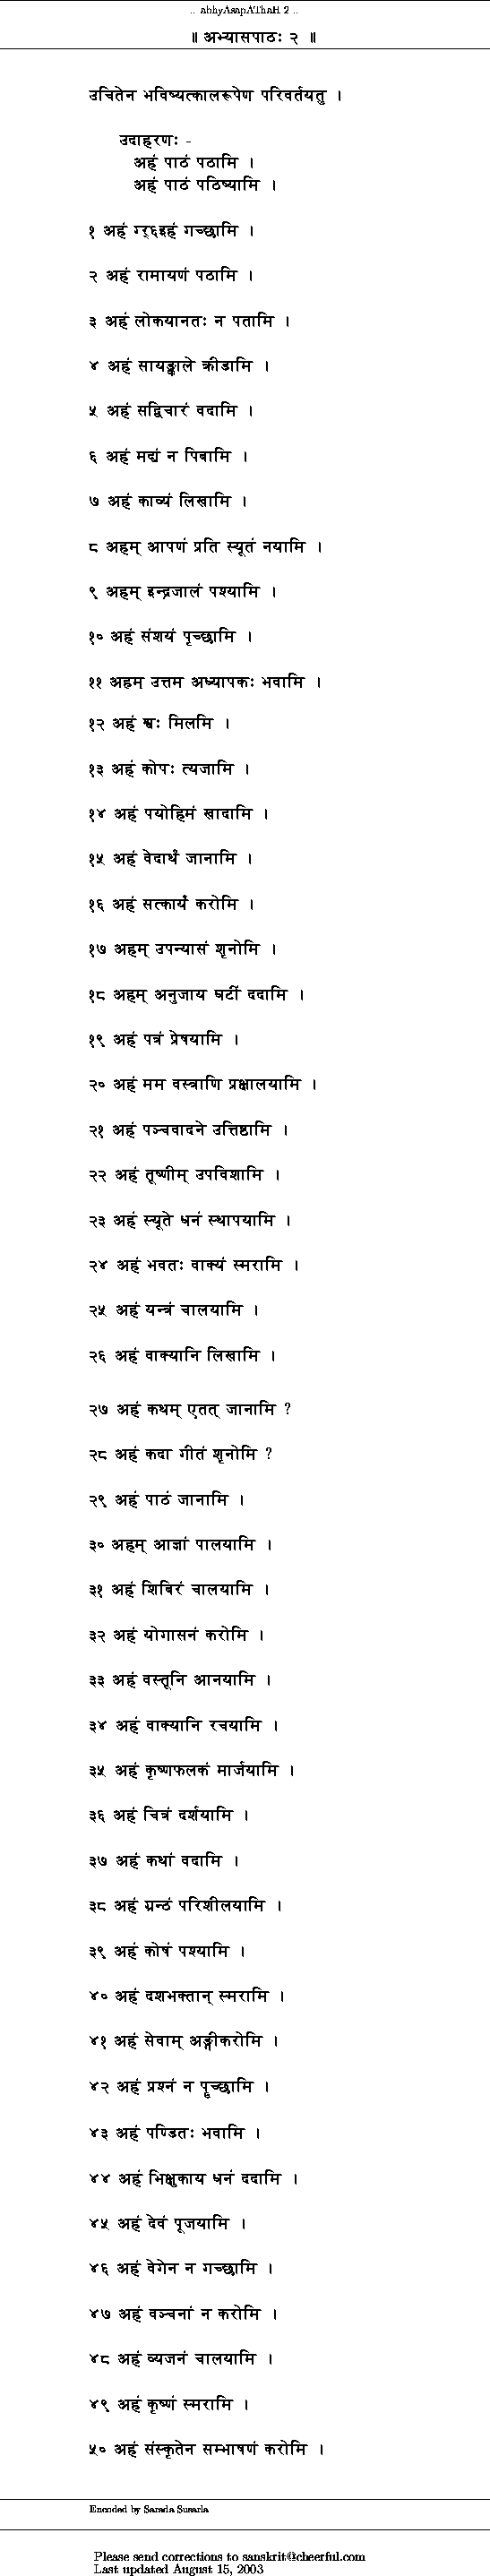 10 lines on daily routine in sanskrit